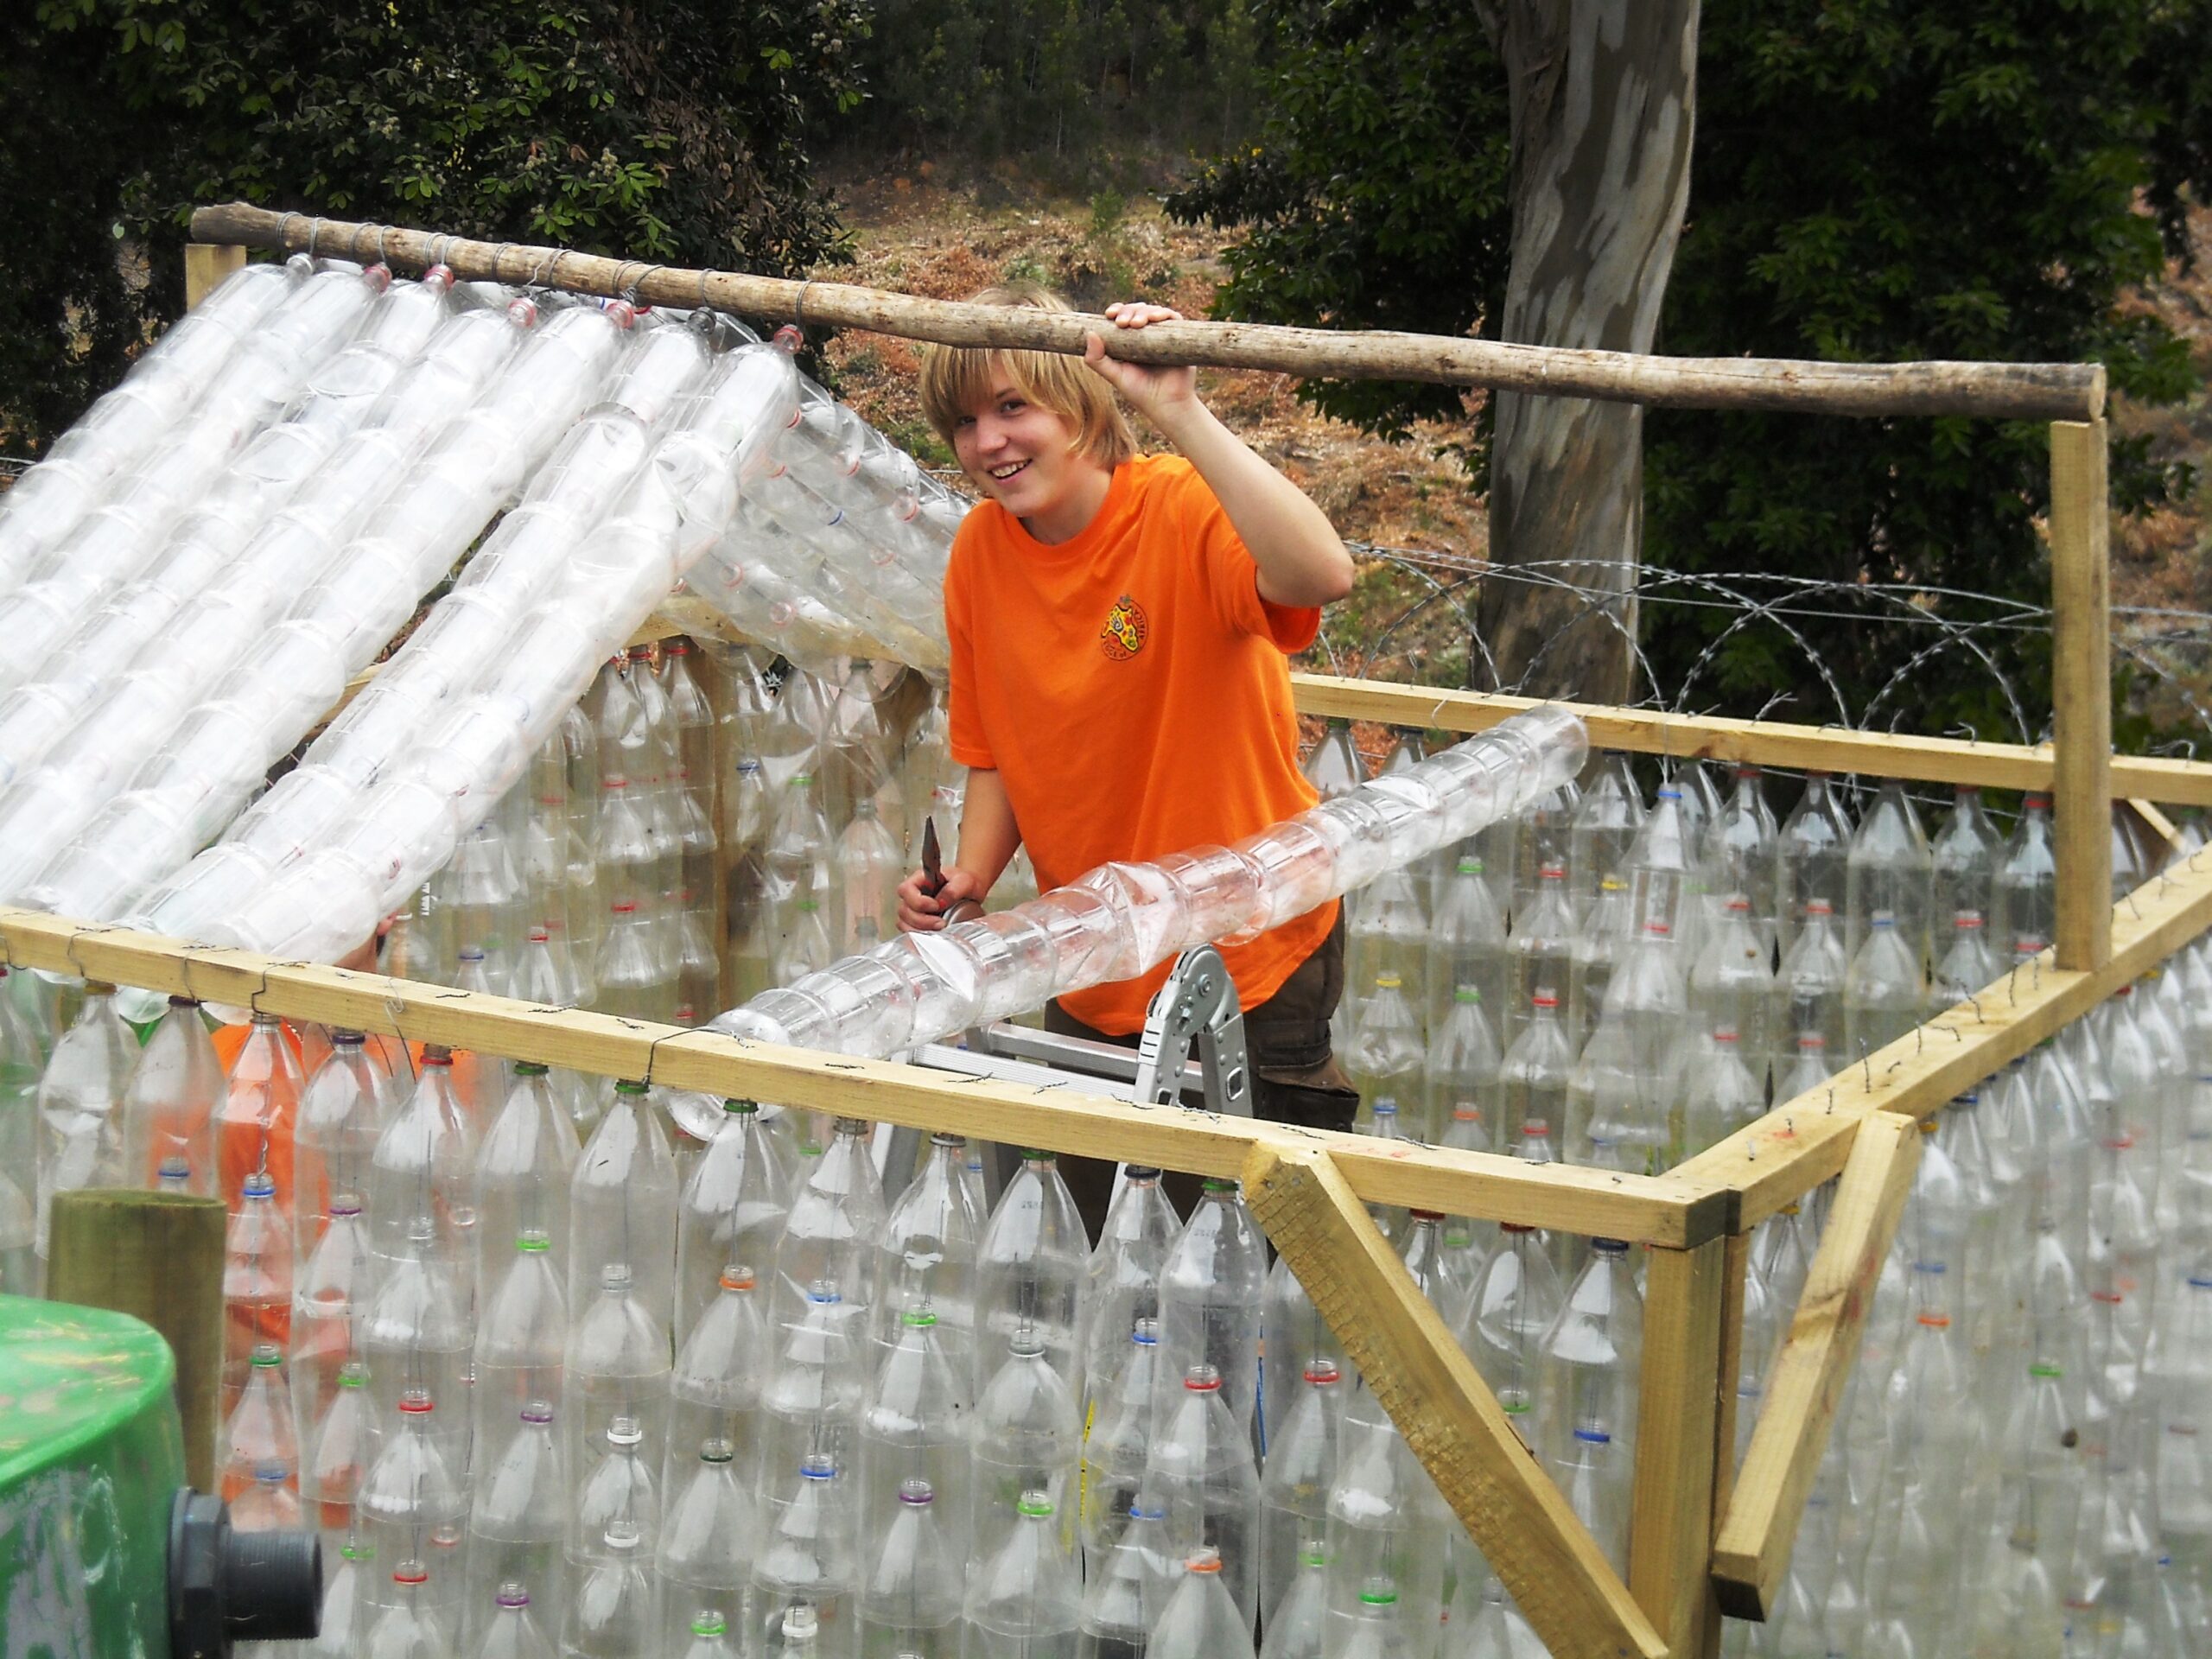 Community Greenhouse built with pop bottles by volunteer Marion